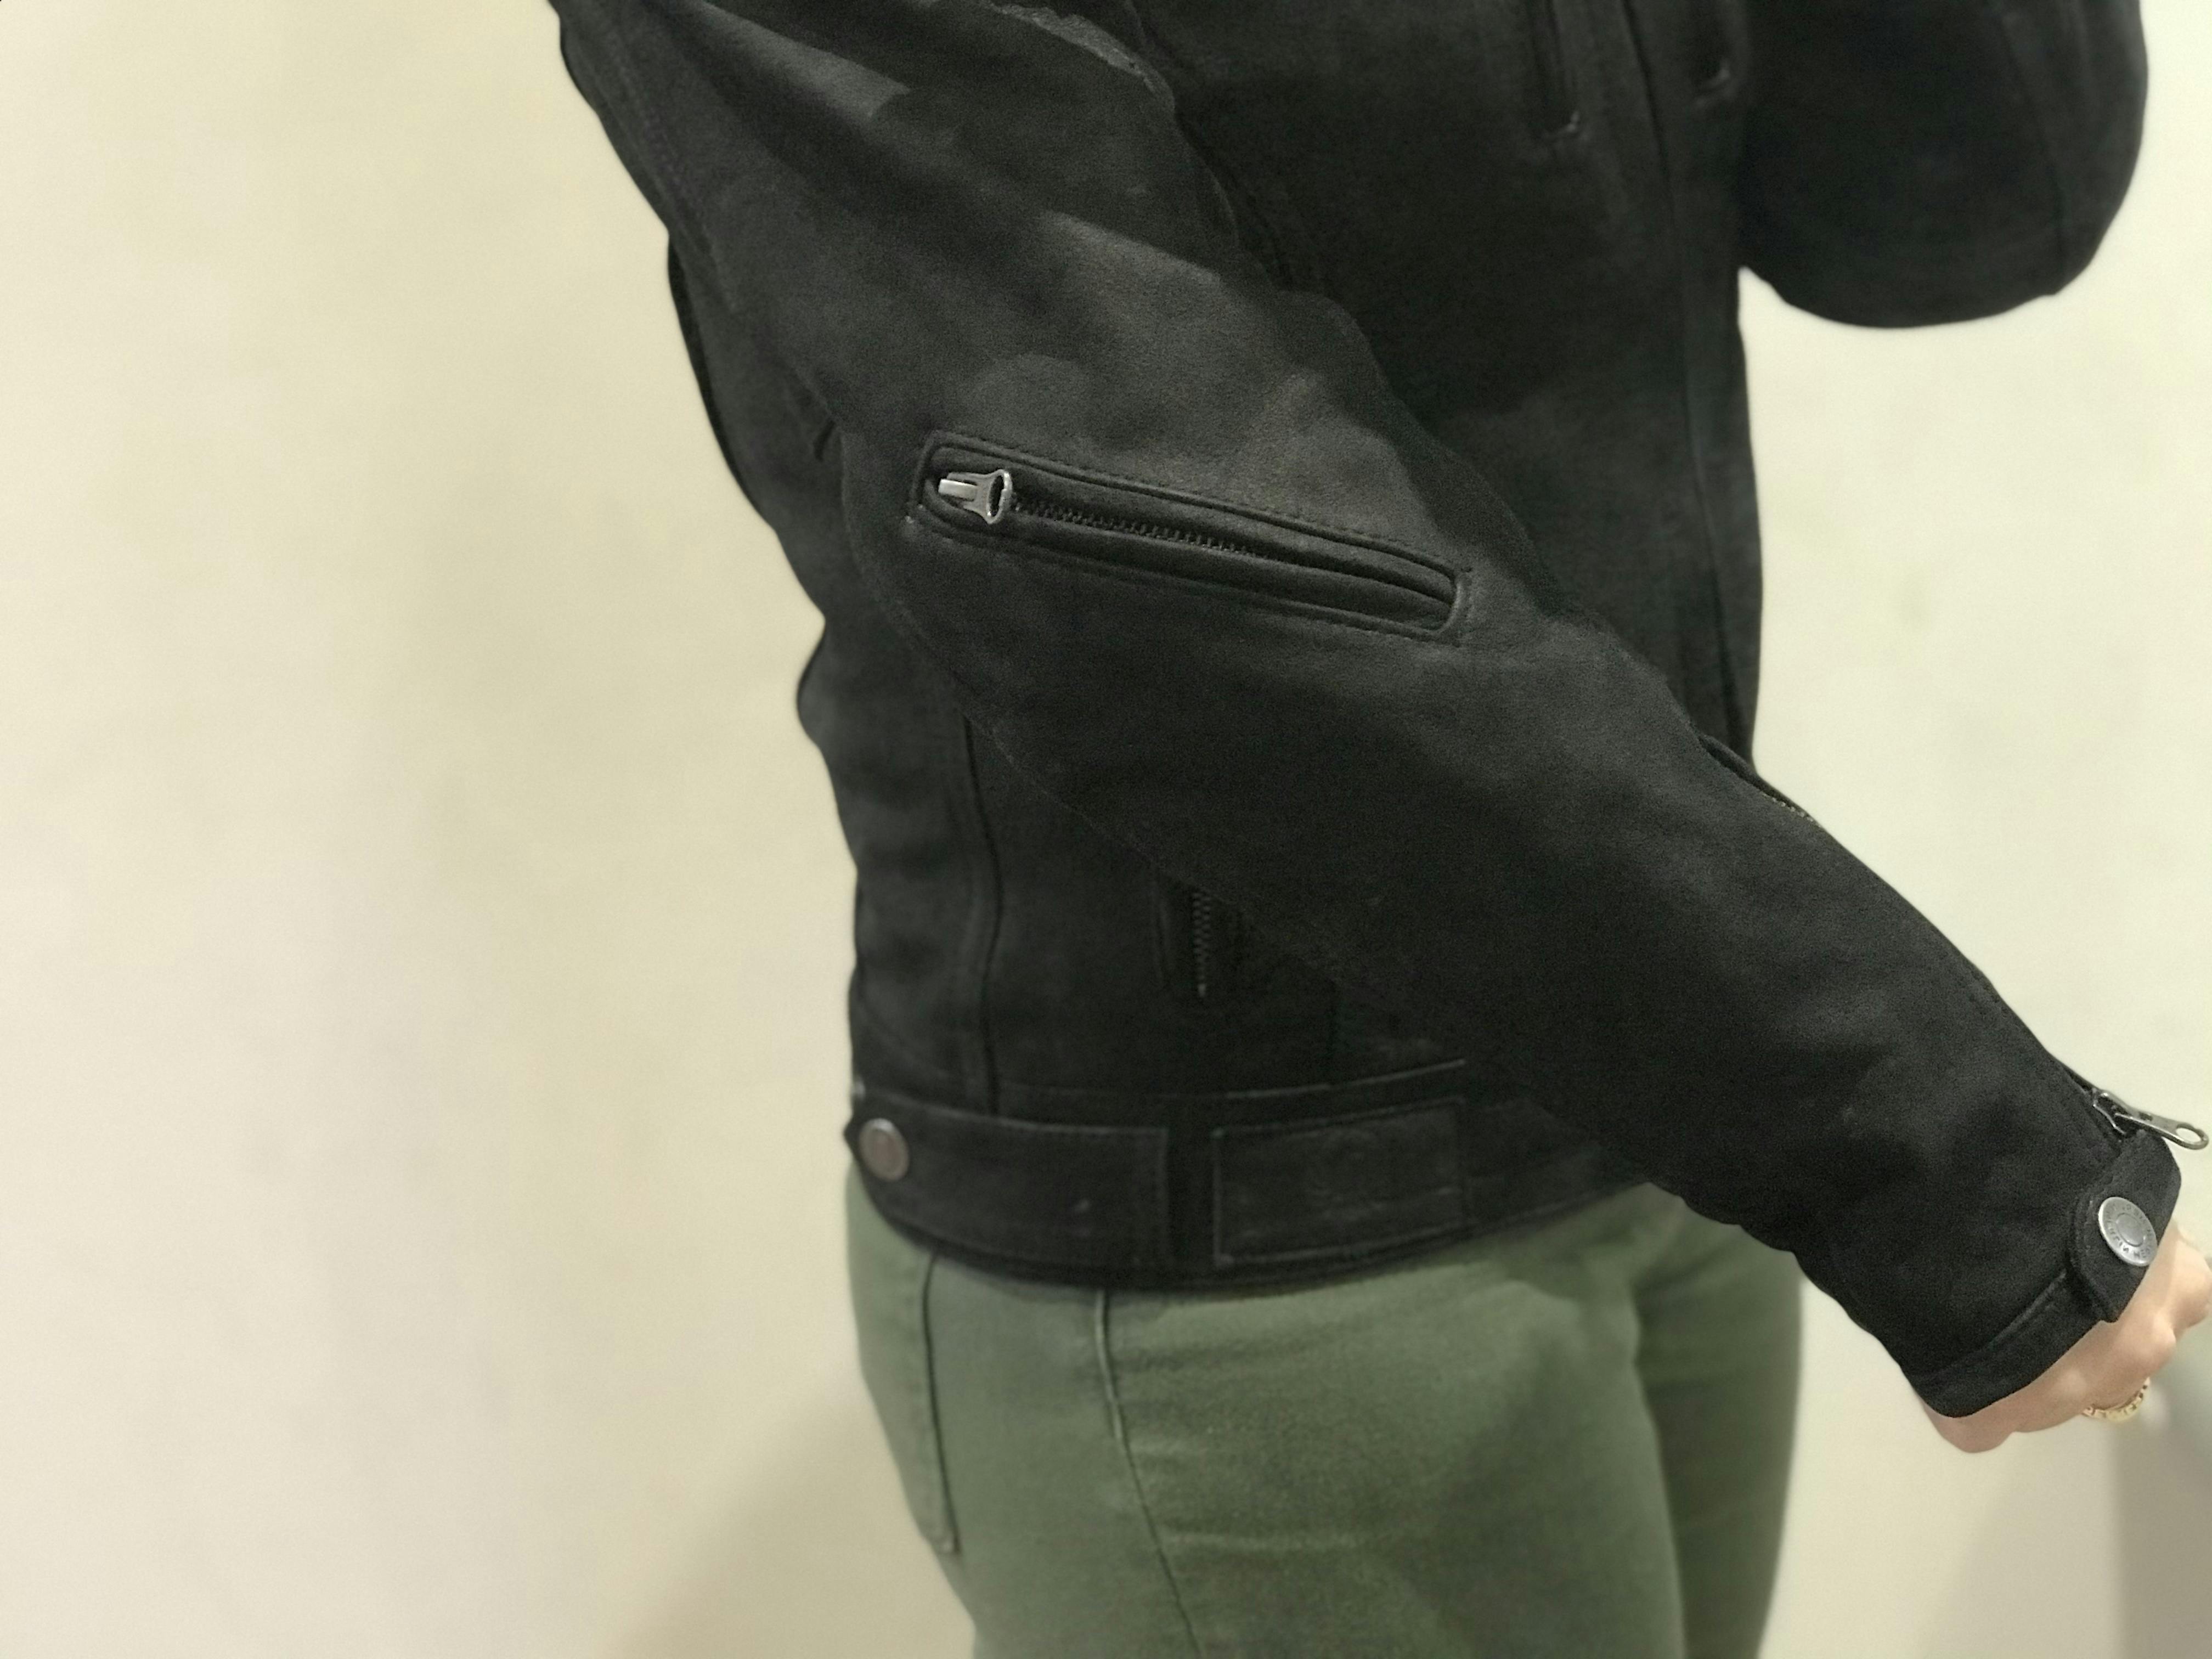 The small arm pocket on the right hand side of the Merlin Mia jacket